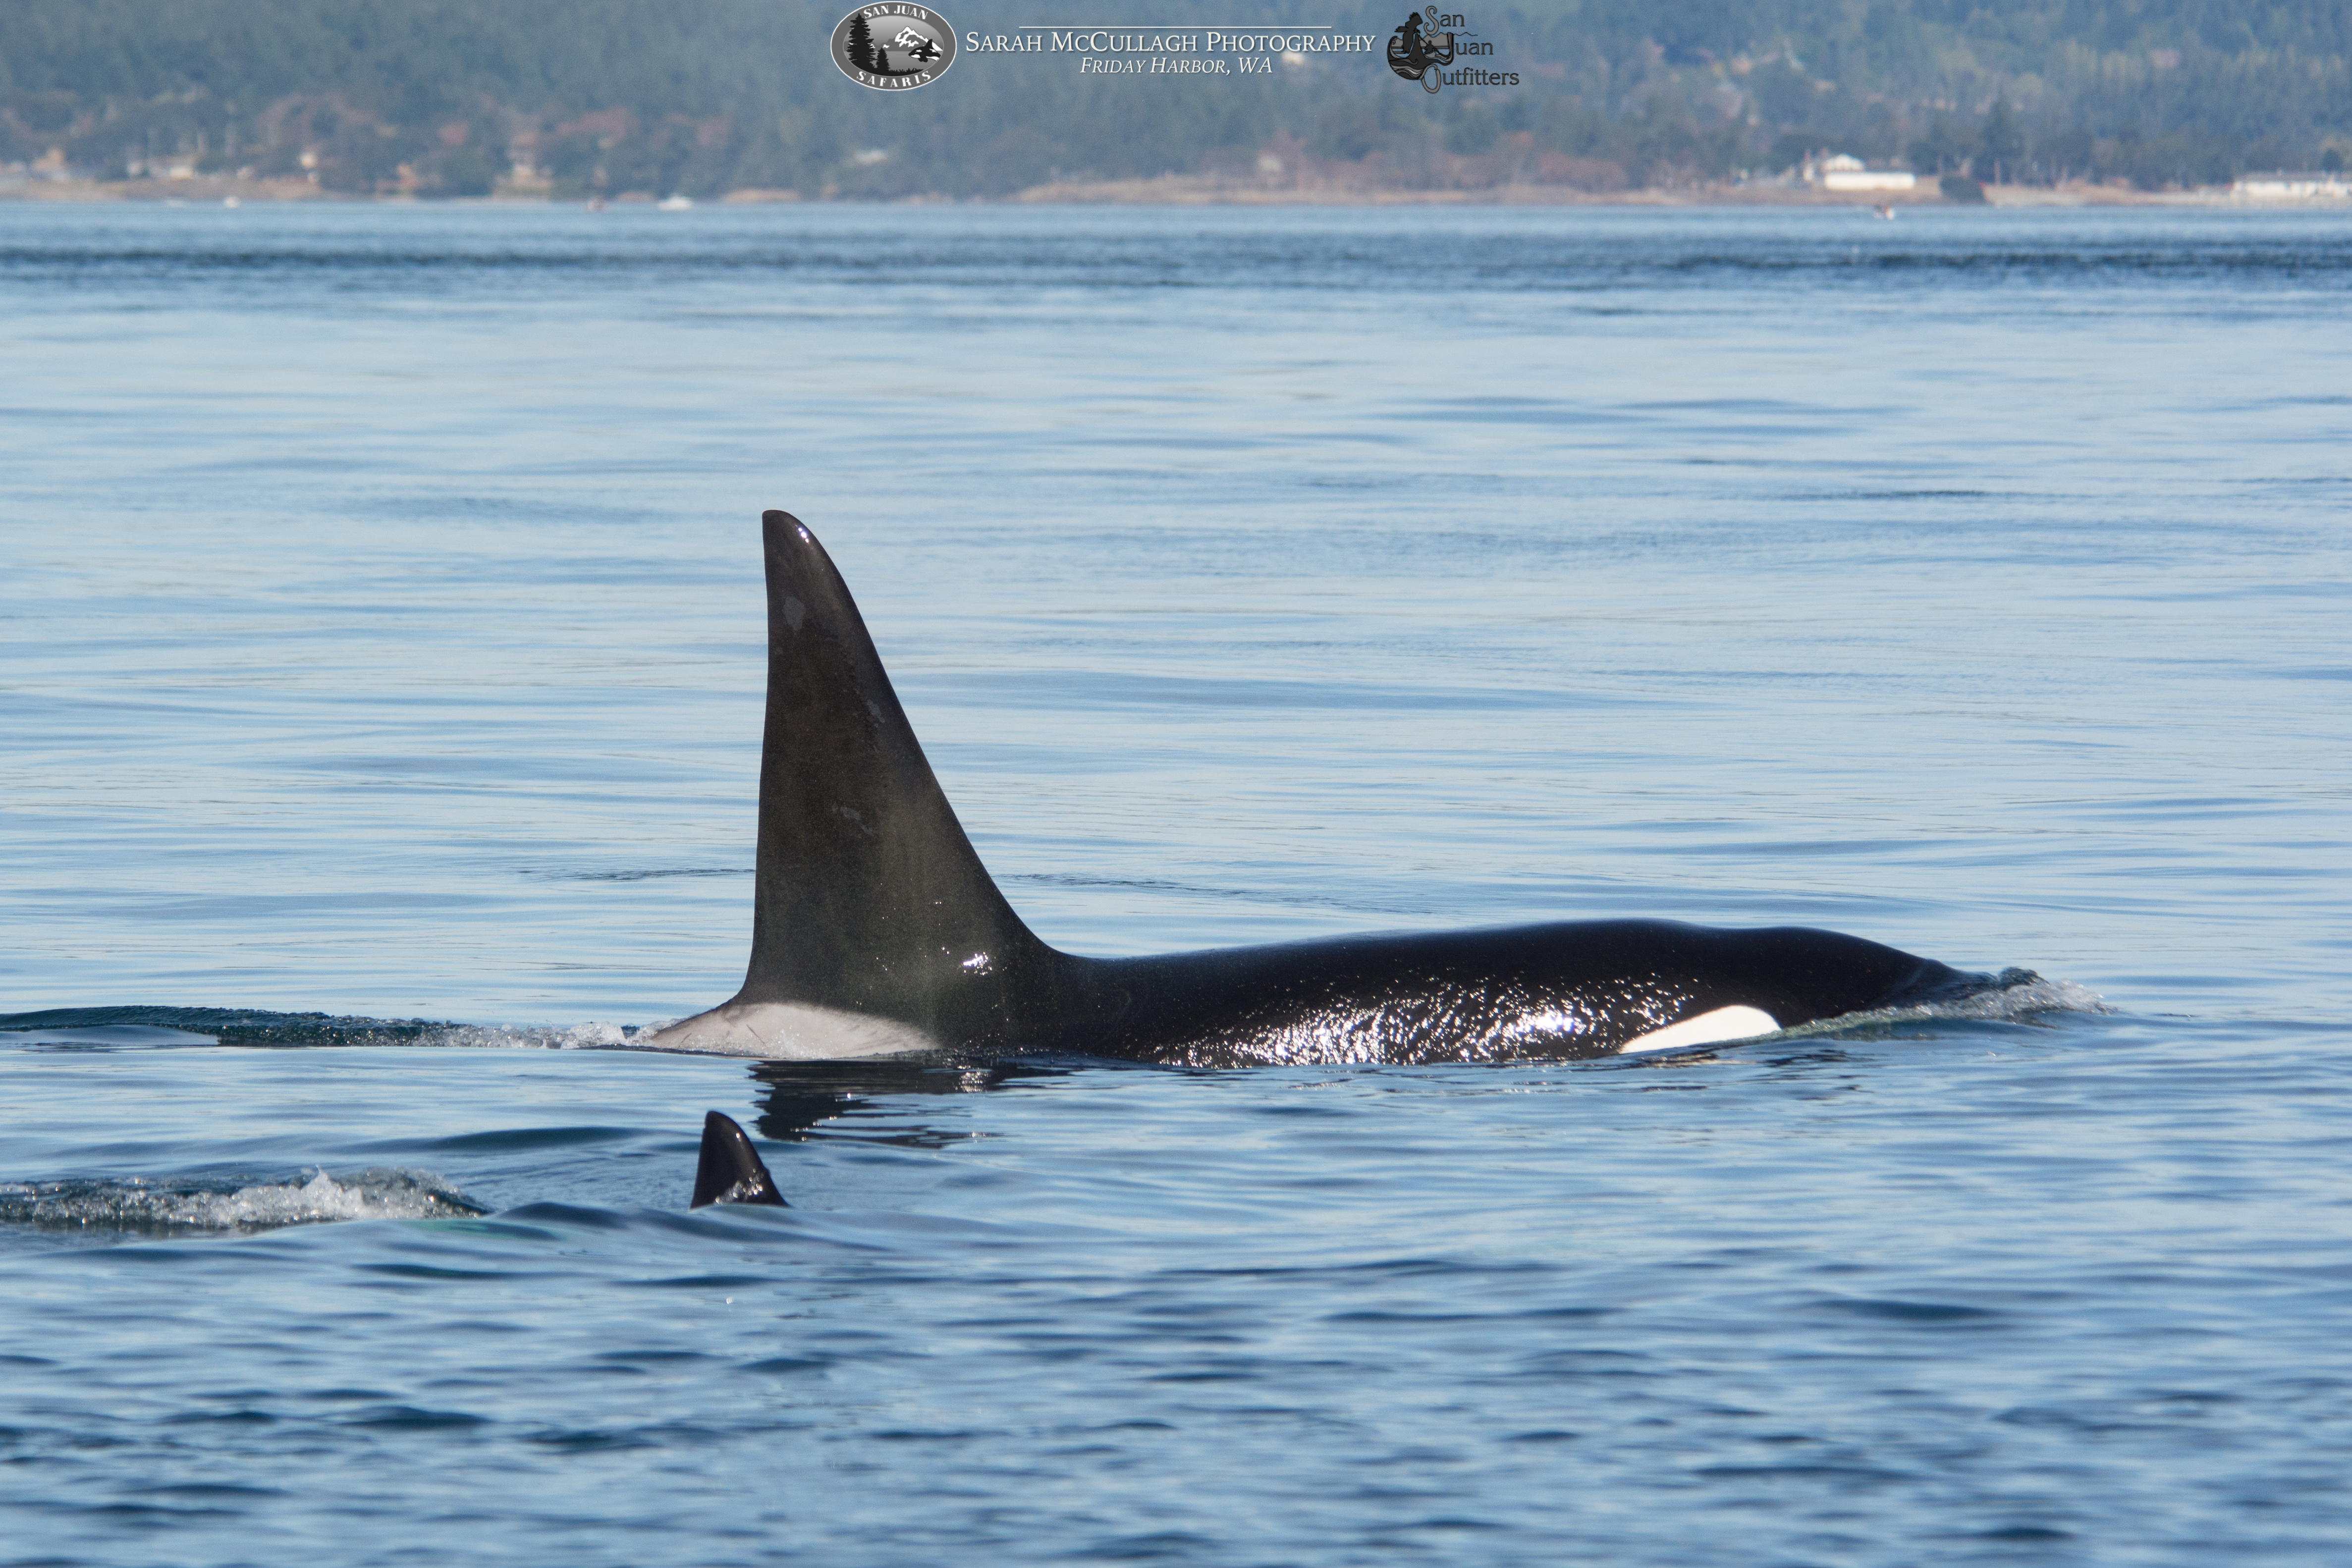 Adventure Whale Watches in the San Juan Islands – Friday 09/15/17